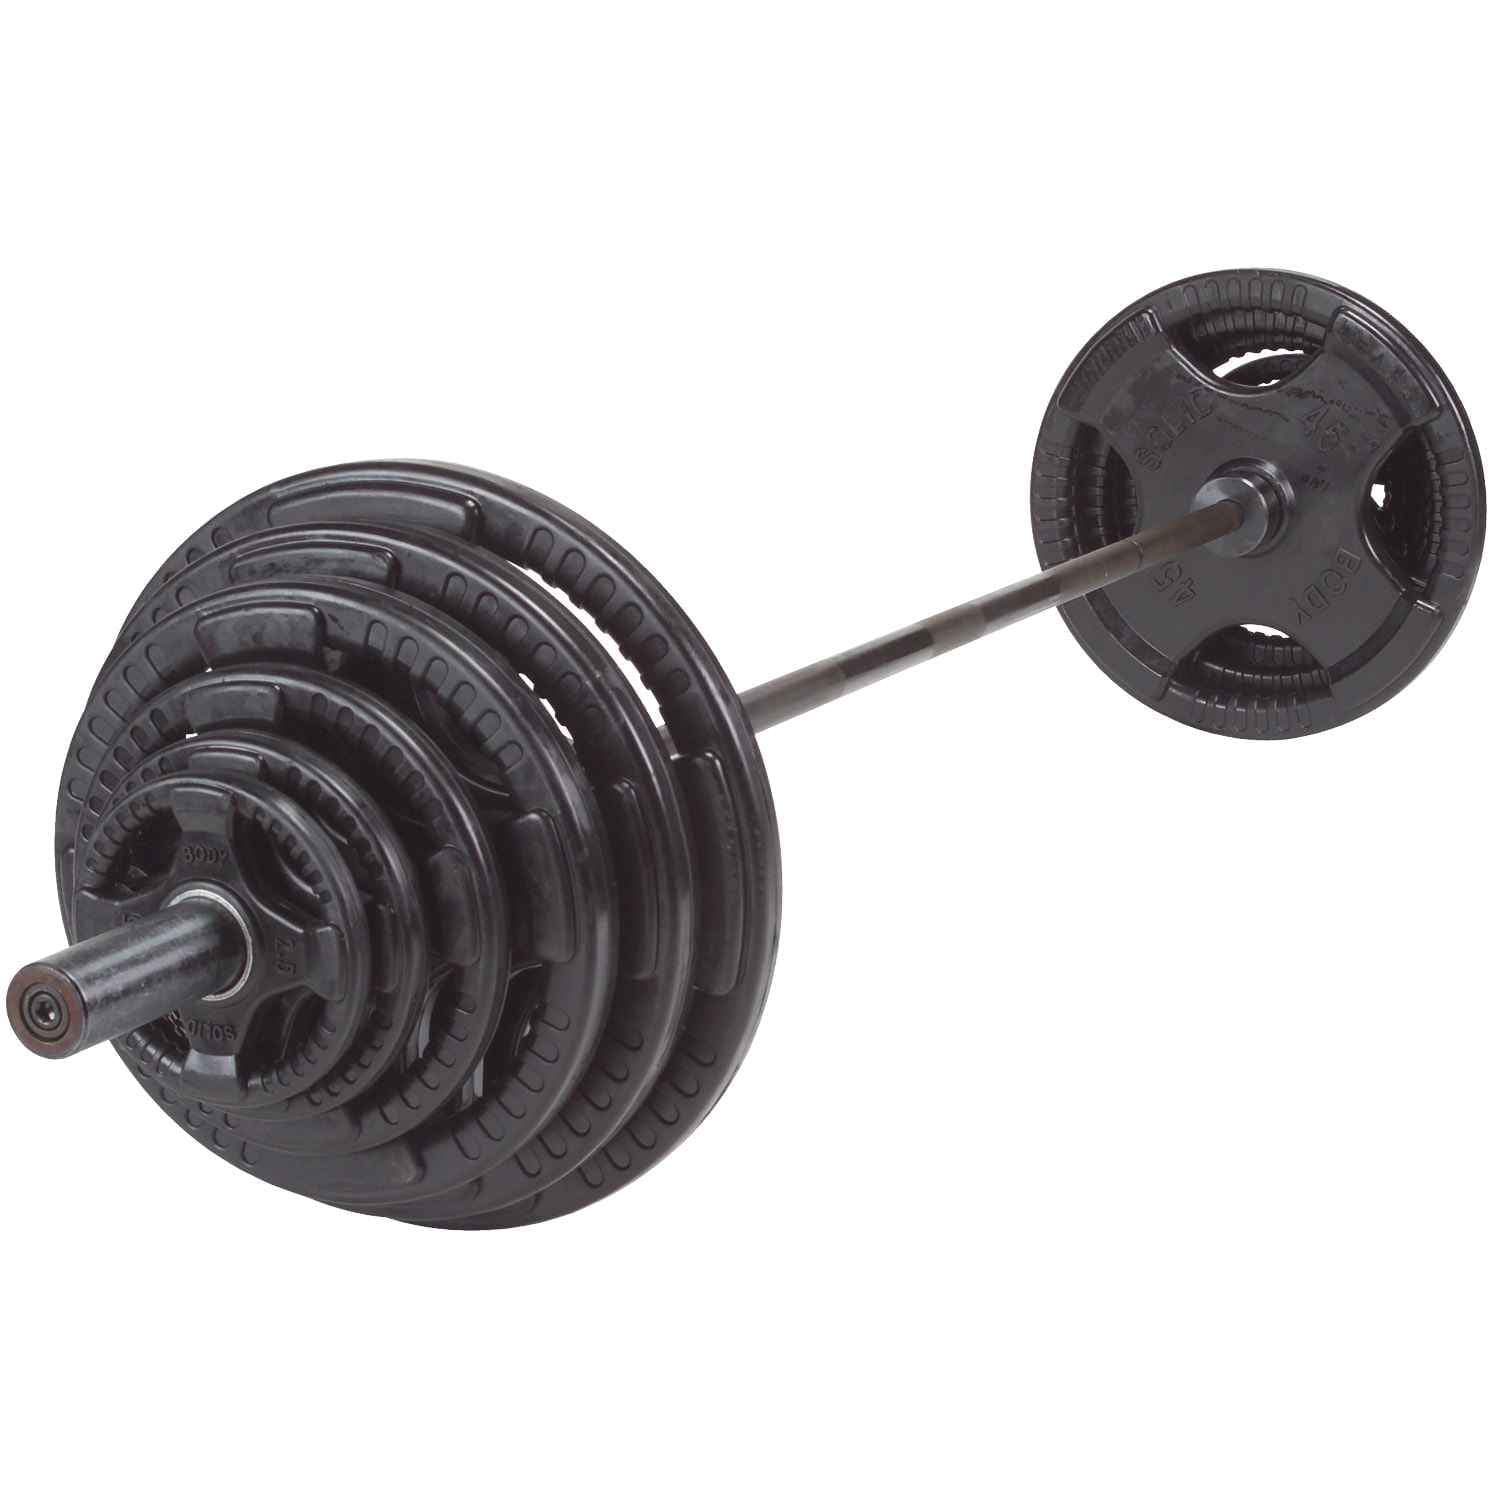 Body-Solid Rubber Grip Olympic Set with Chrome Bar plate Body-Solid Iron 